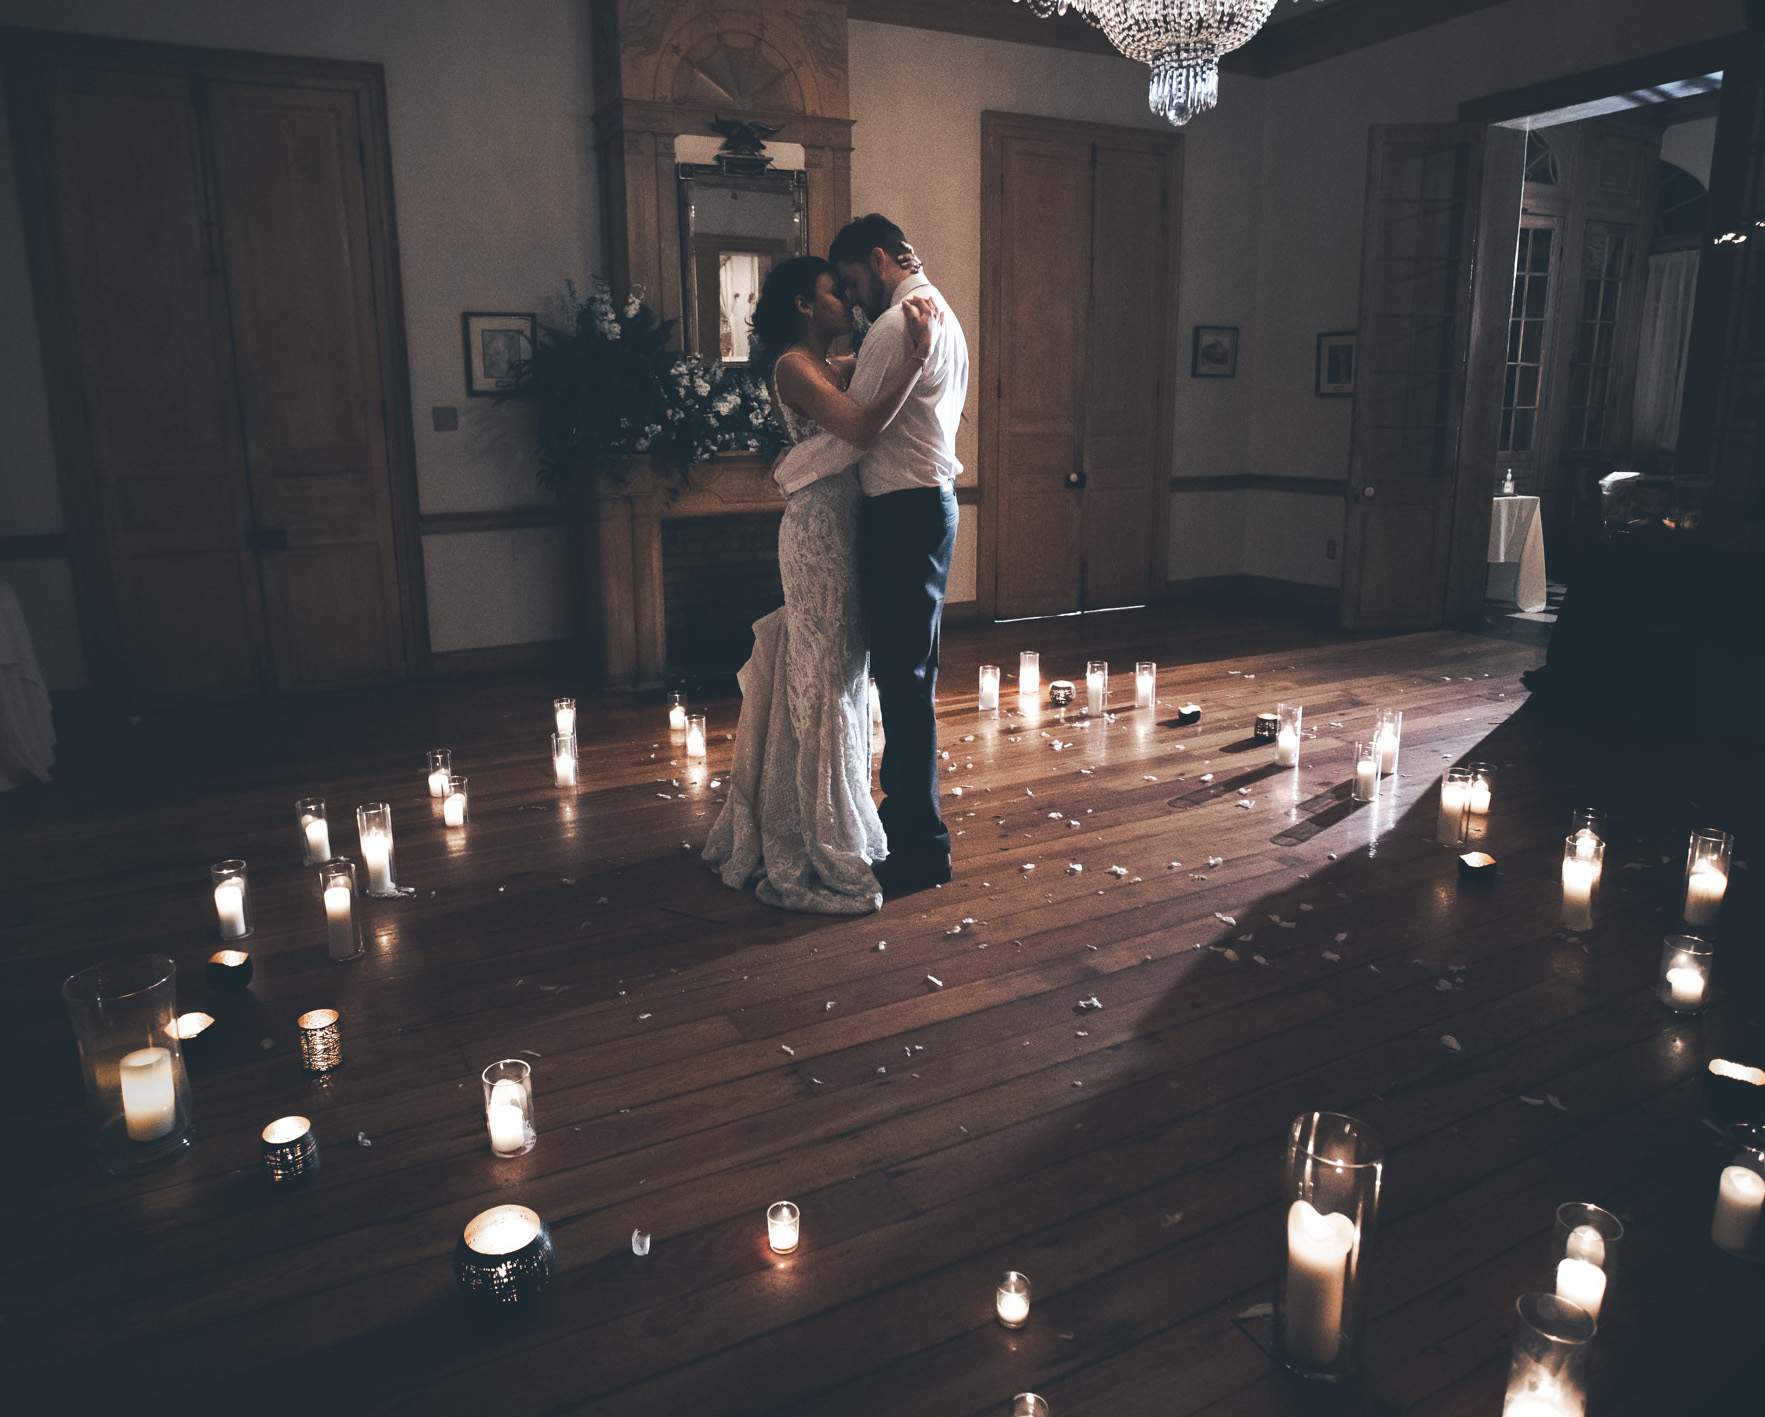 A bride and groom dance in a room lit with candles during their NOLA destination wedding.